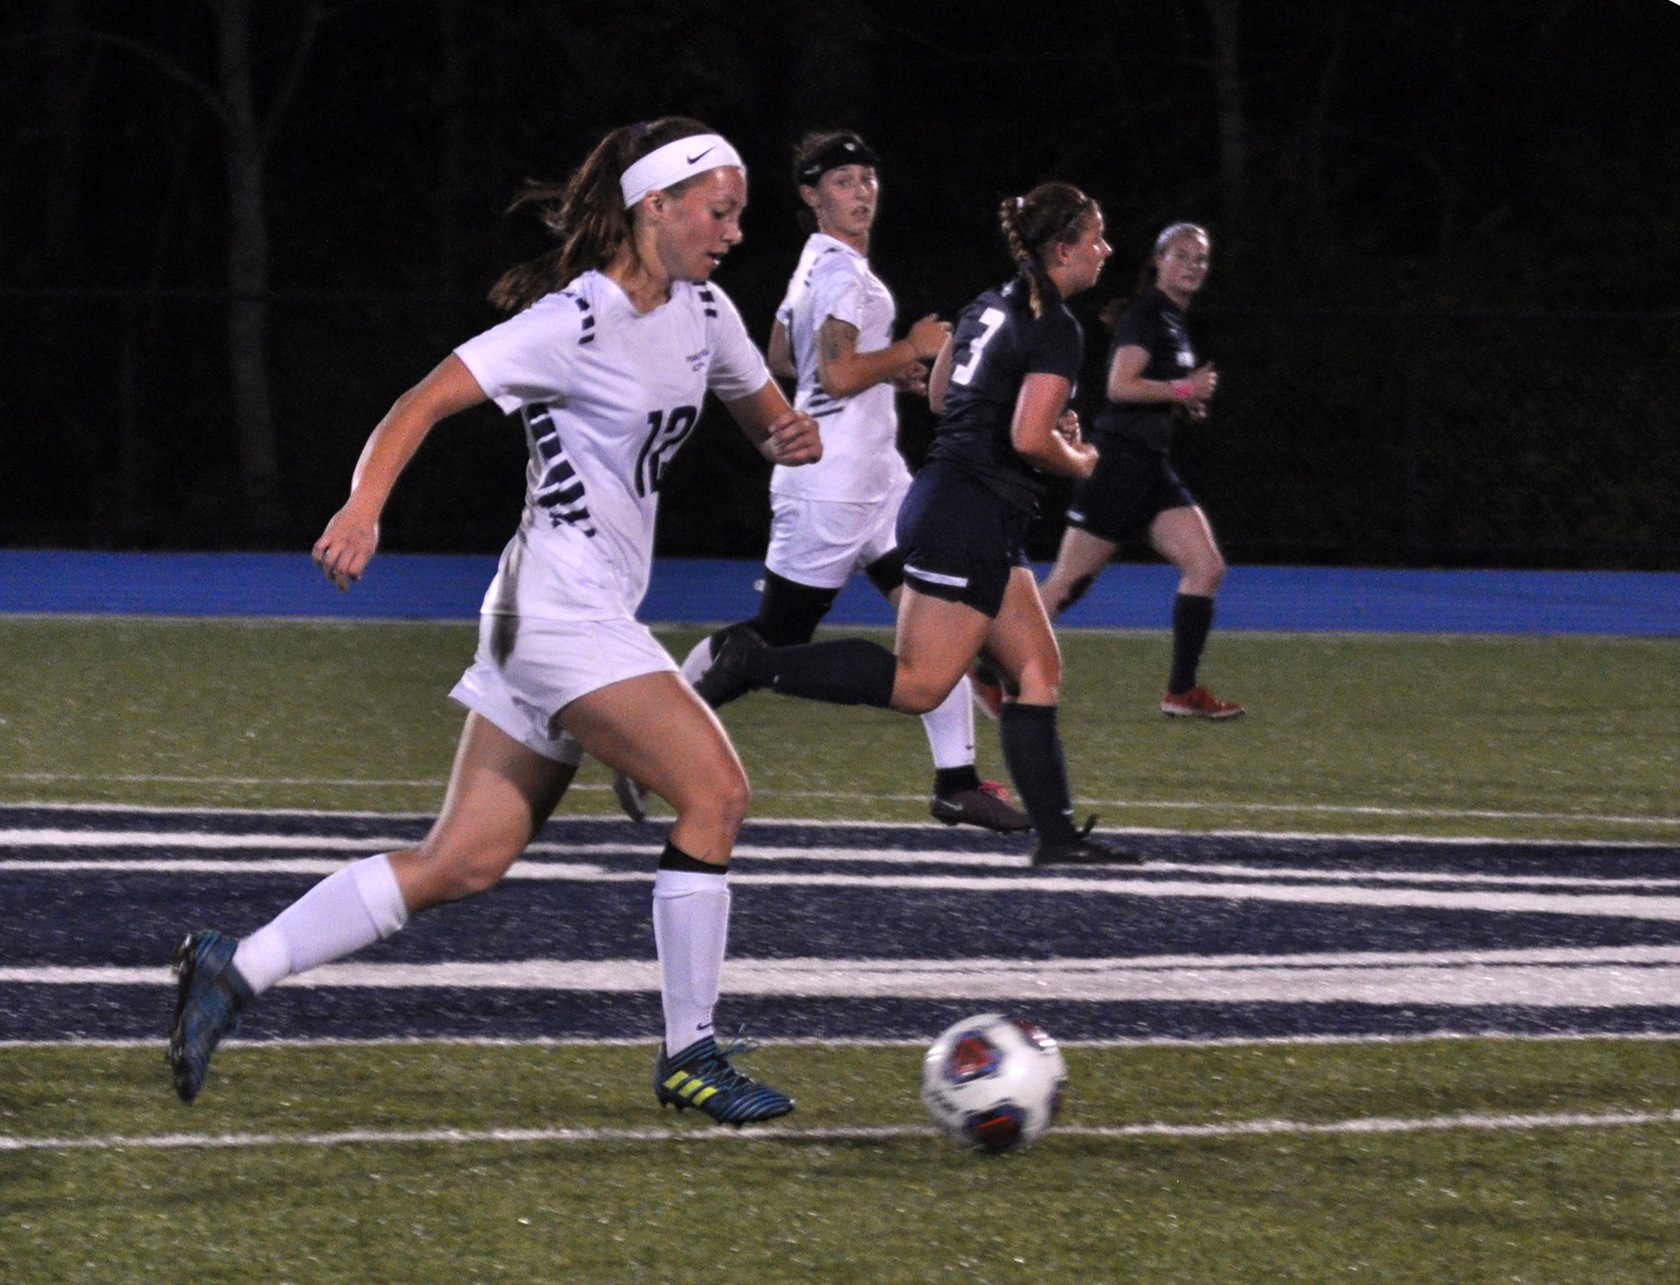 Photo (by Joel Nelson): Penn State Altoona freshman Haley Giedroc brings the ball across midfield during her team's game against Mount Aloysius College on Wednesday night at Spring Run Stadium.